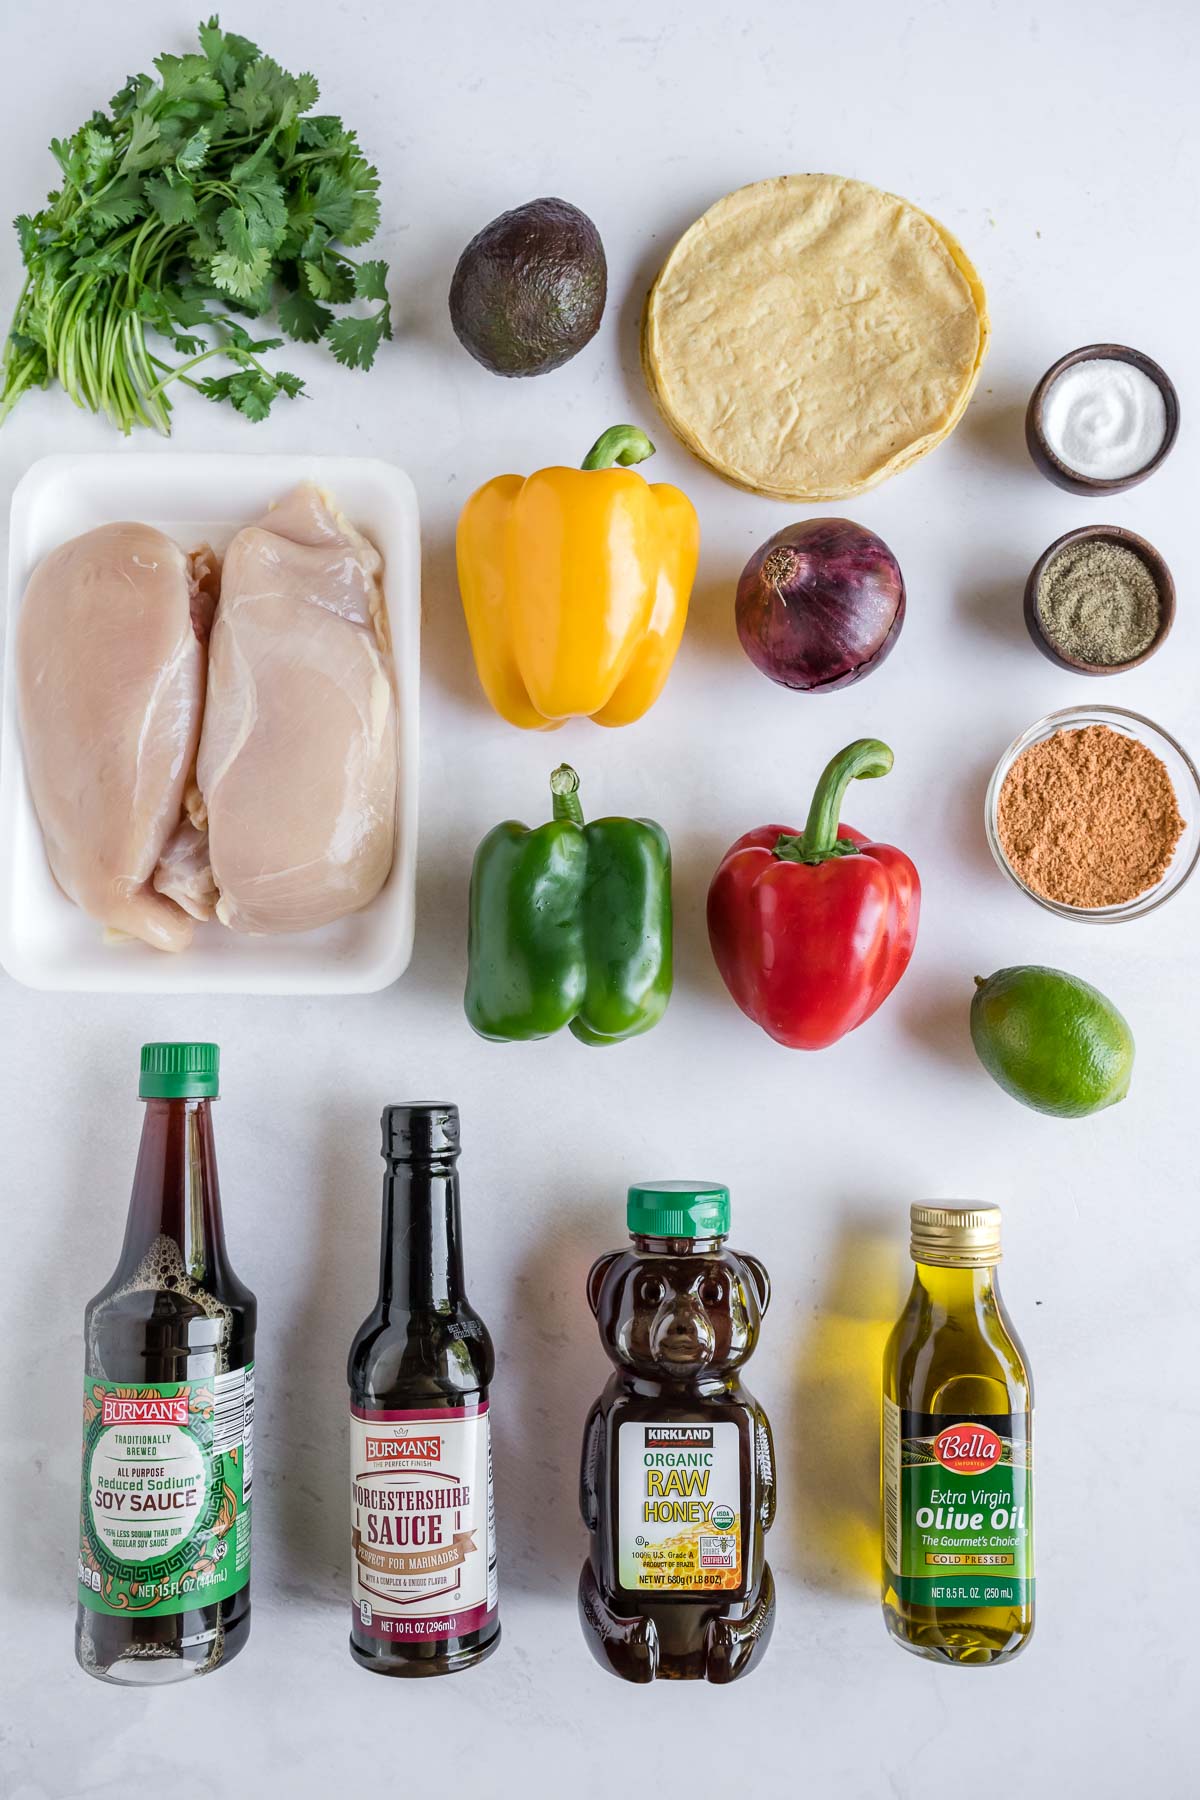 Chicken, onions, bell peppers, spices, oil, Worcestershire sauce, and honey are some of the ingredients for this dish.